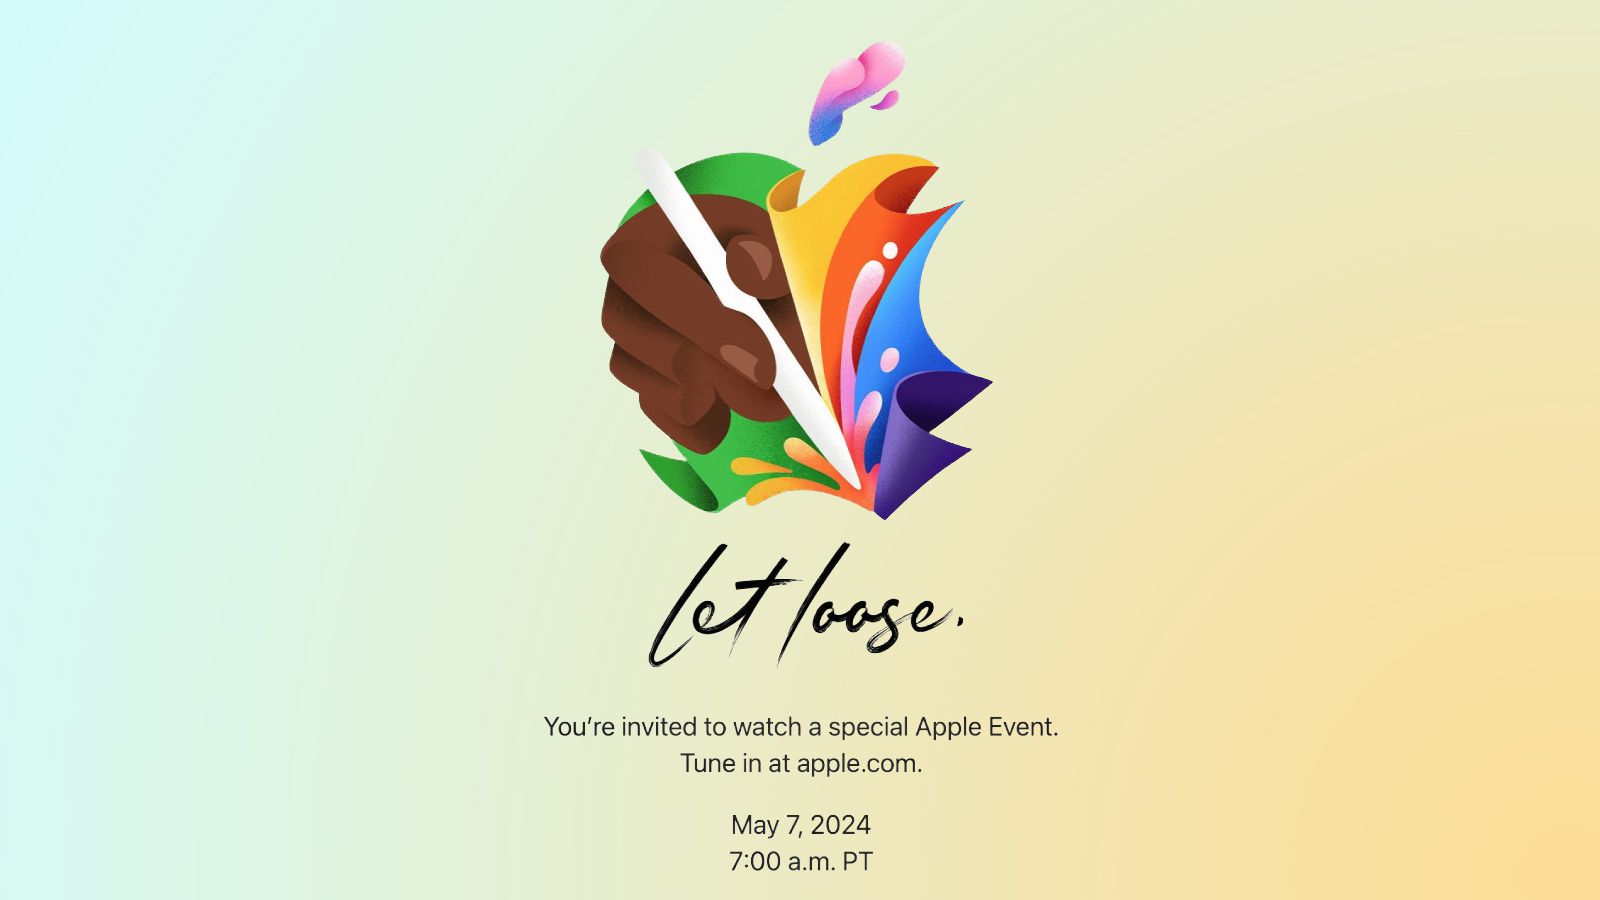 Apple Announces 'Let Loose' Event on May 7 - macrumors.com